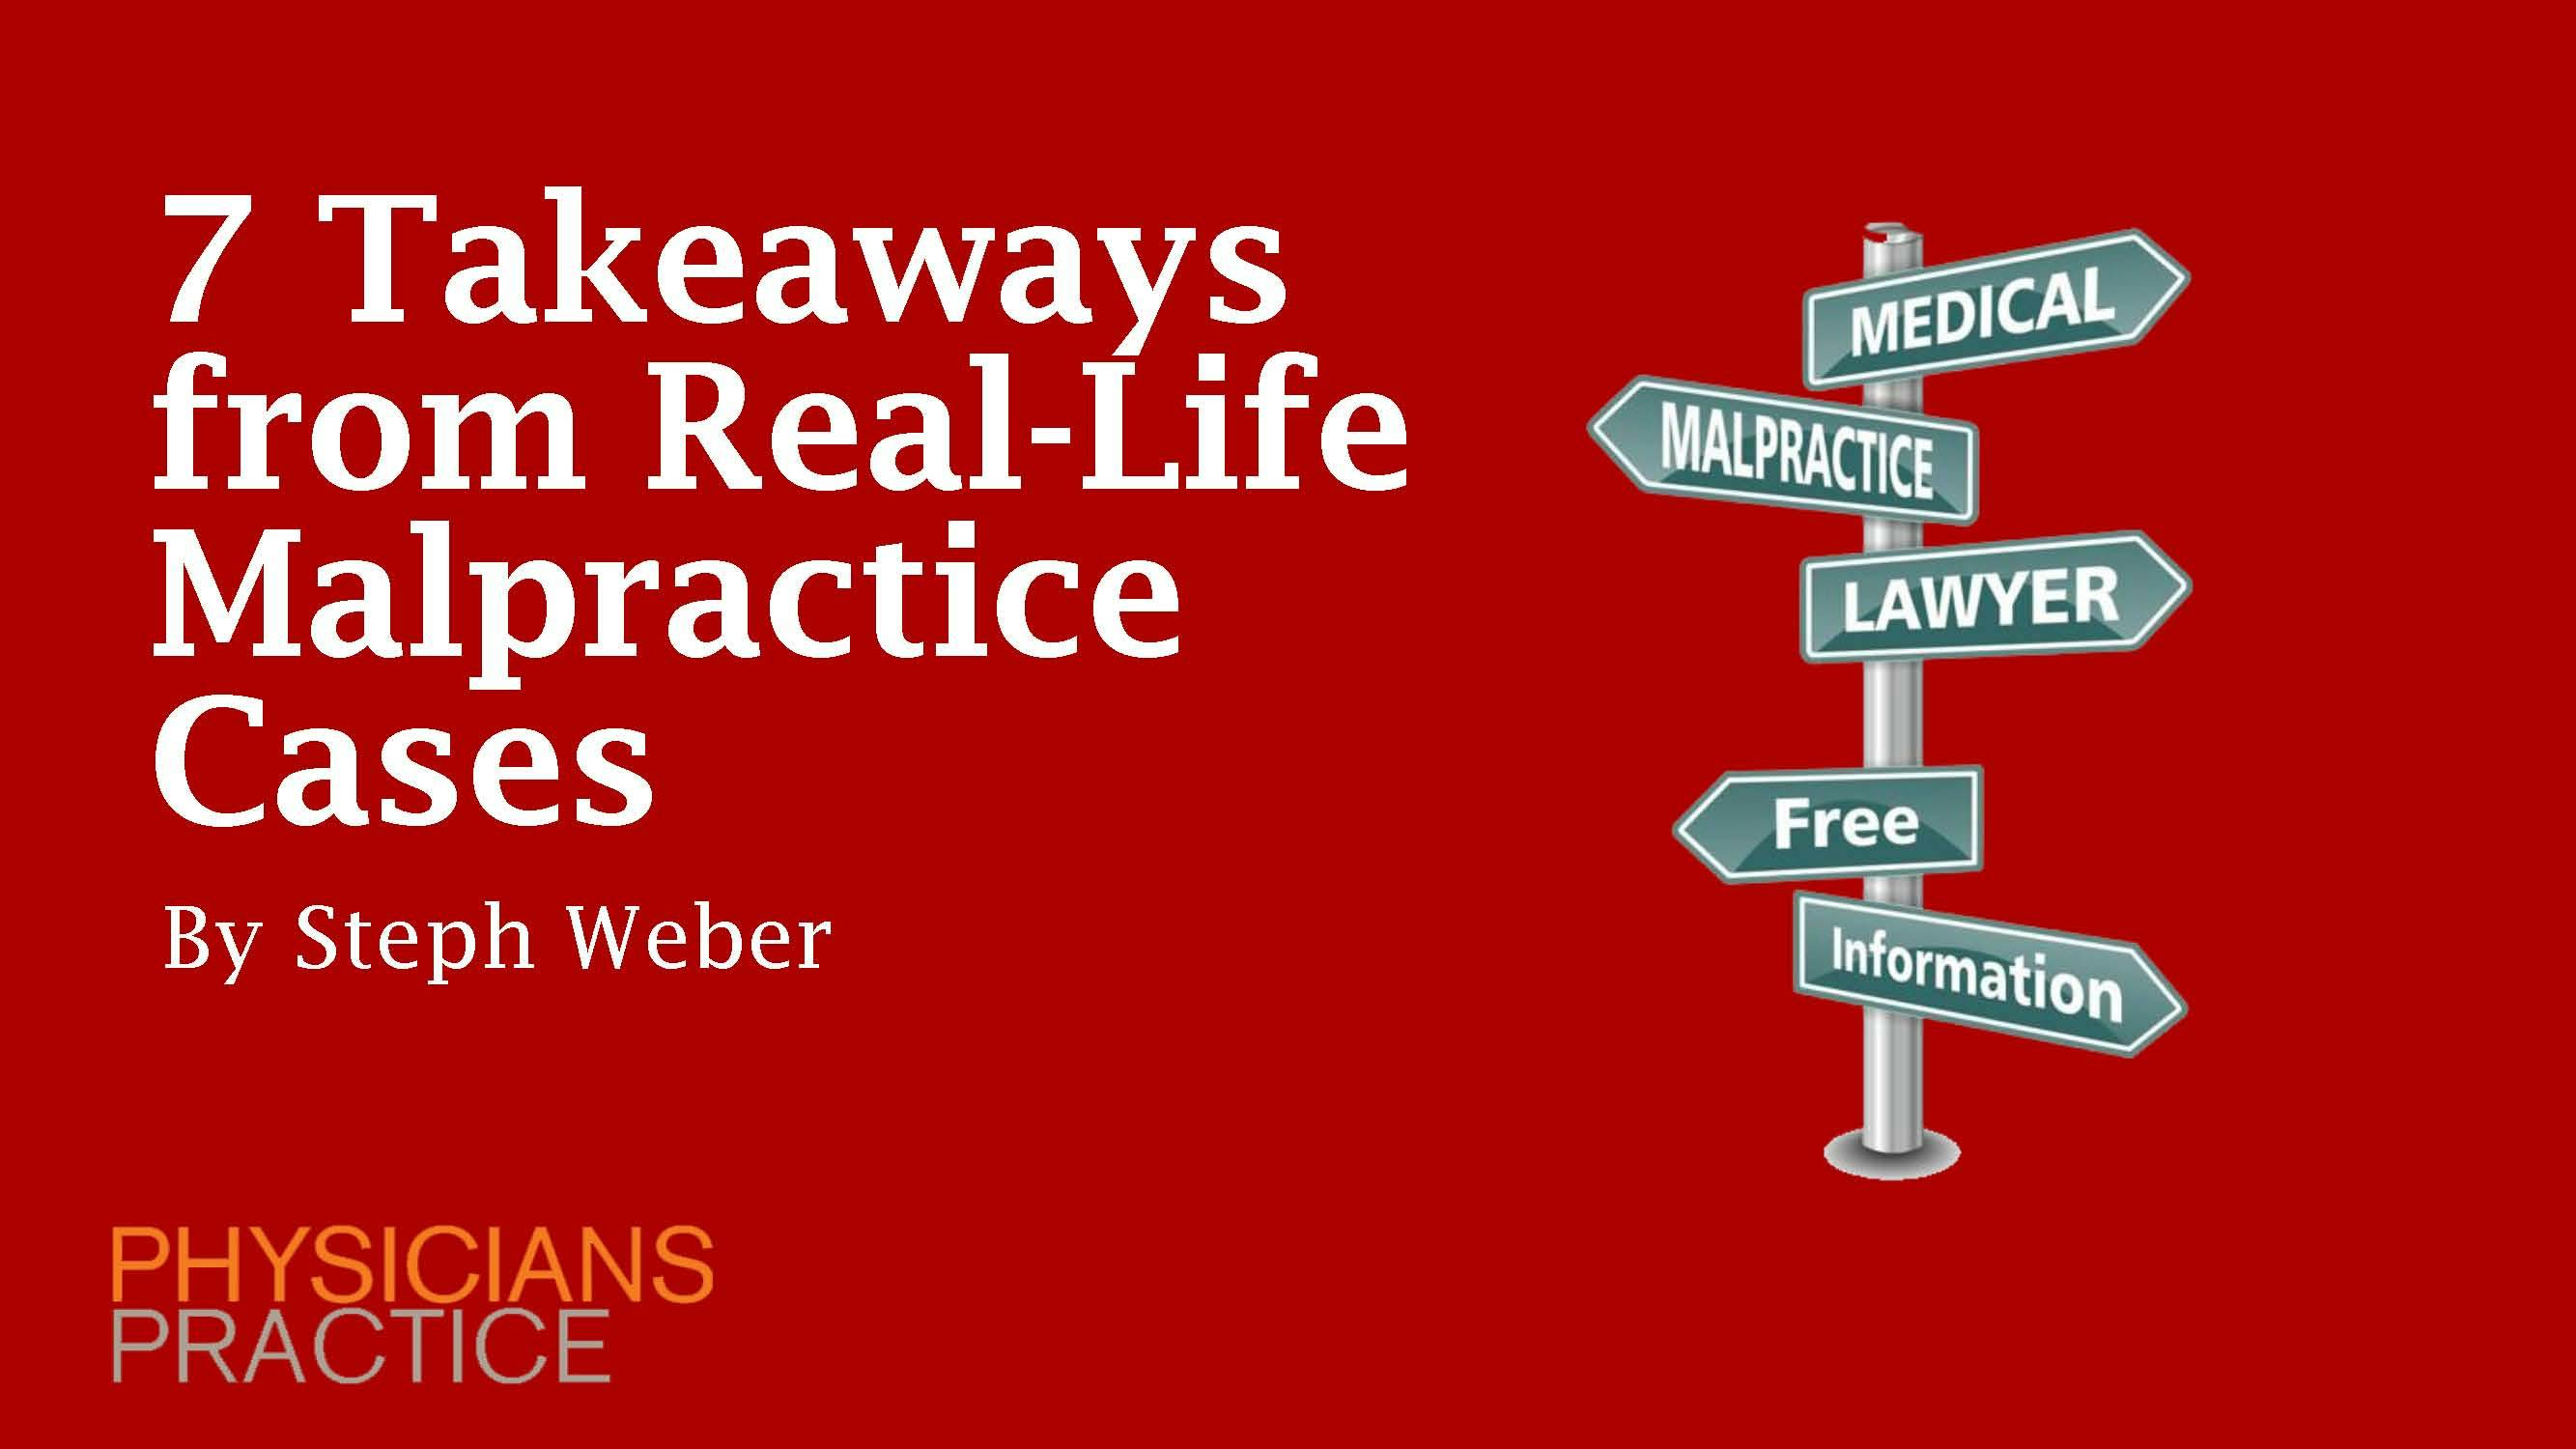 7 Takeaways from Real-Life Malpractice Cases 